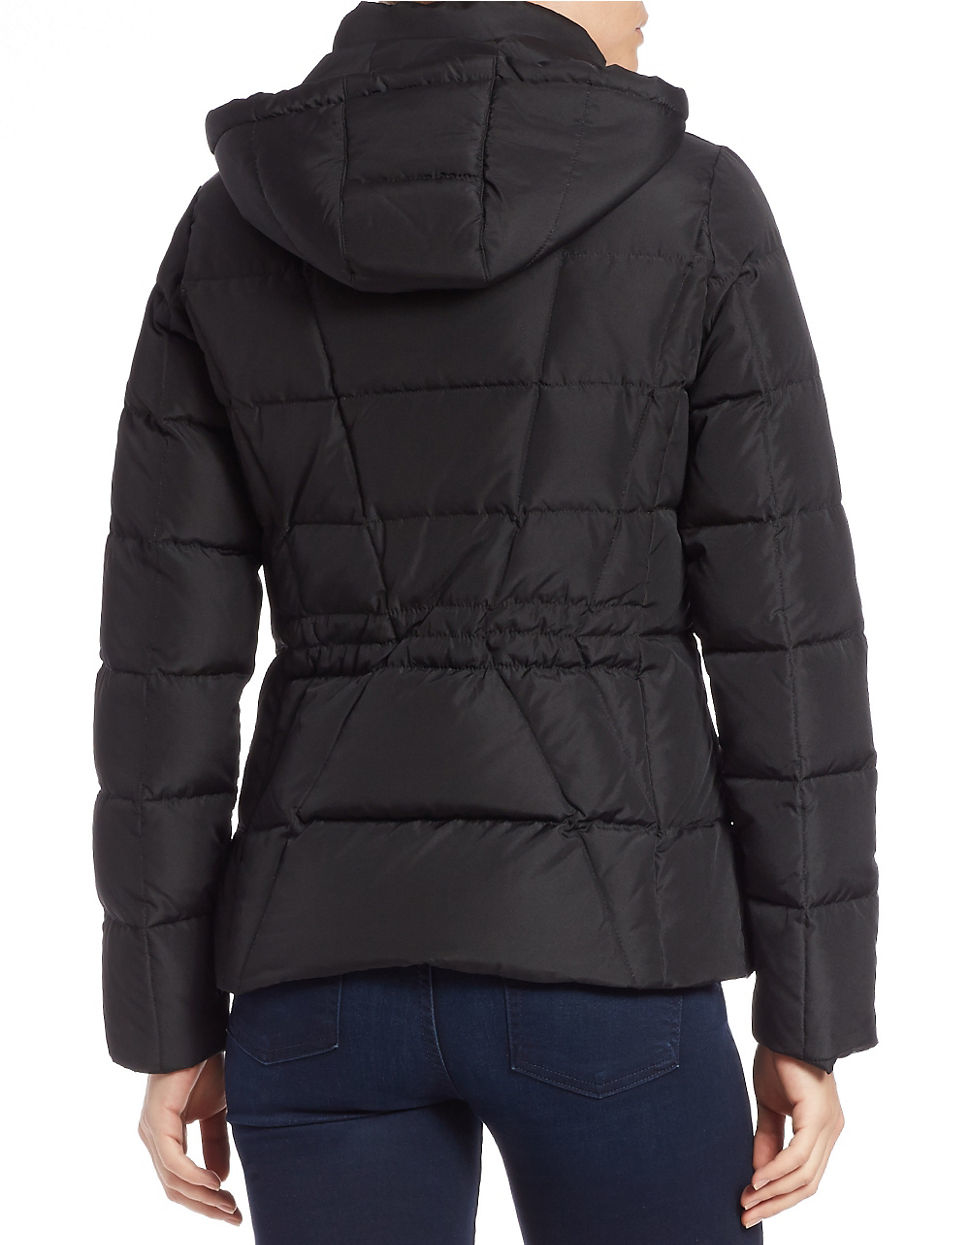 Calvin Klein Synthetic Hooded Puffer Jacket in Black - Lyst